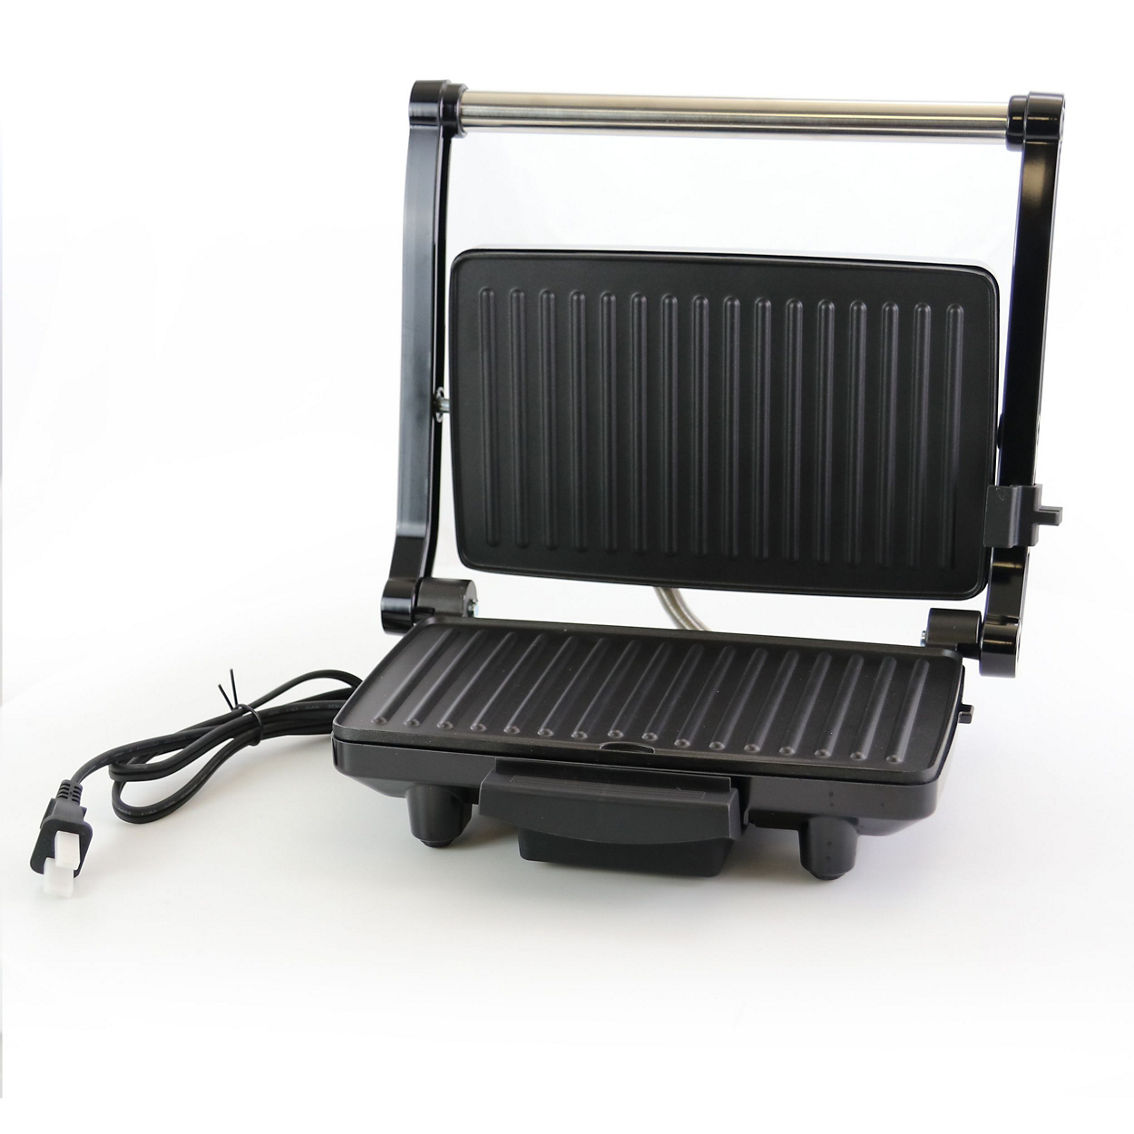 Better Chef Stainless Steel Panini Press Gourmet Sandwich Maker - Image 5 of 5